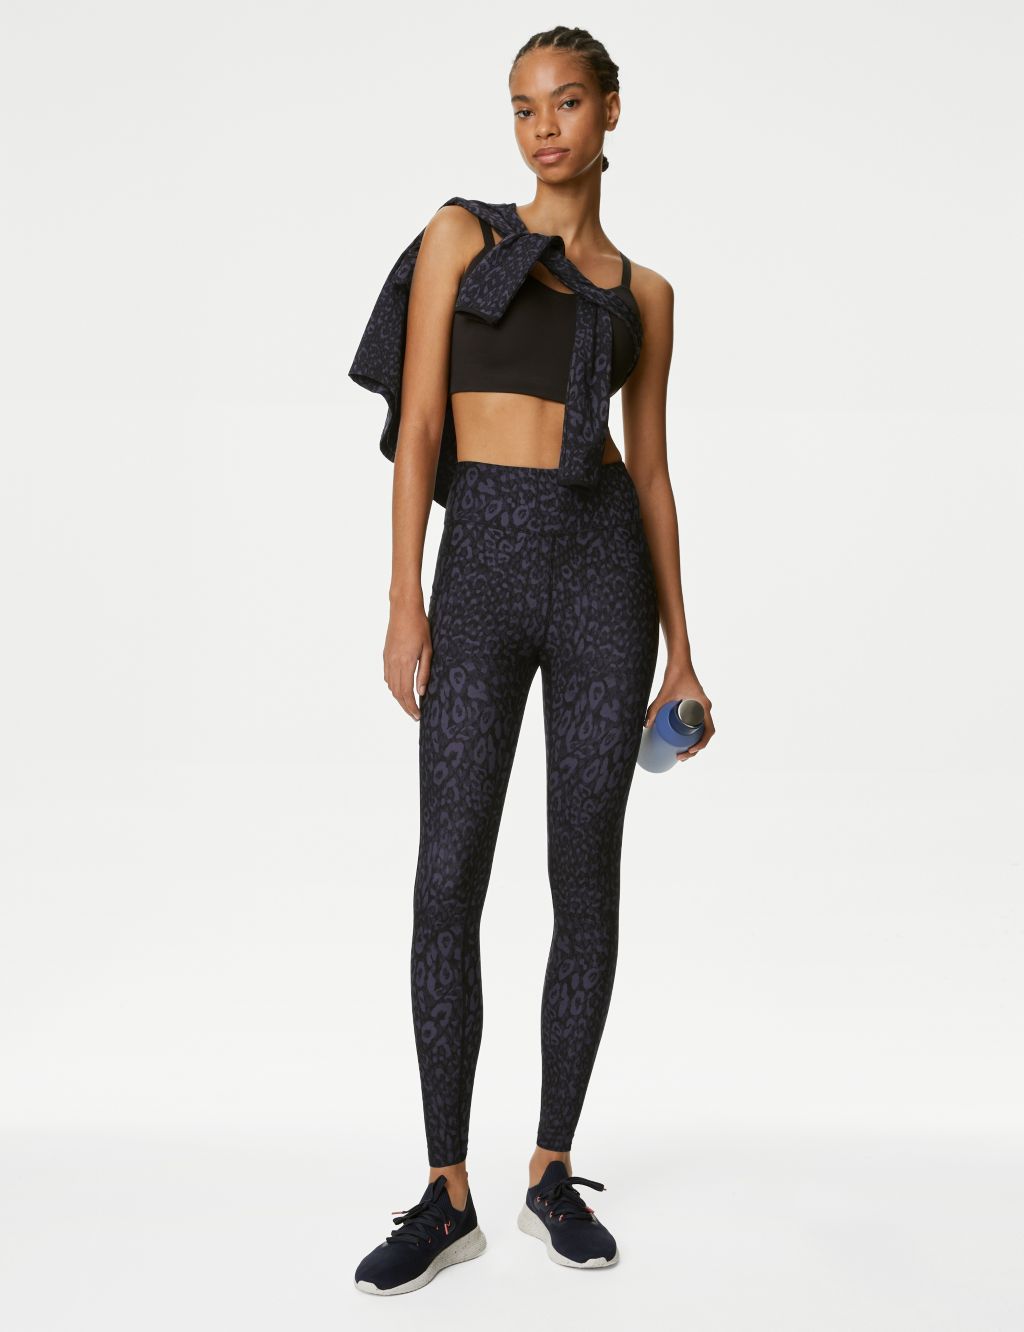 niveau Fitness Voorschrijven Go Move Printed High Waisted Gym Leggings | Goodmove | M&S